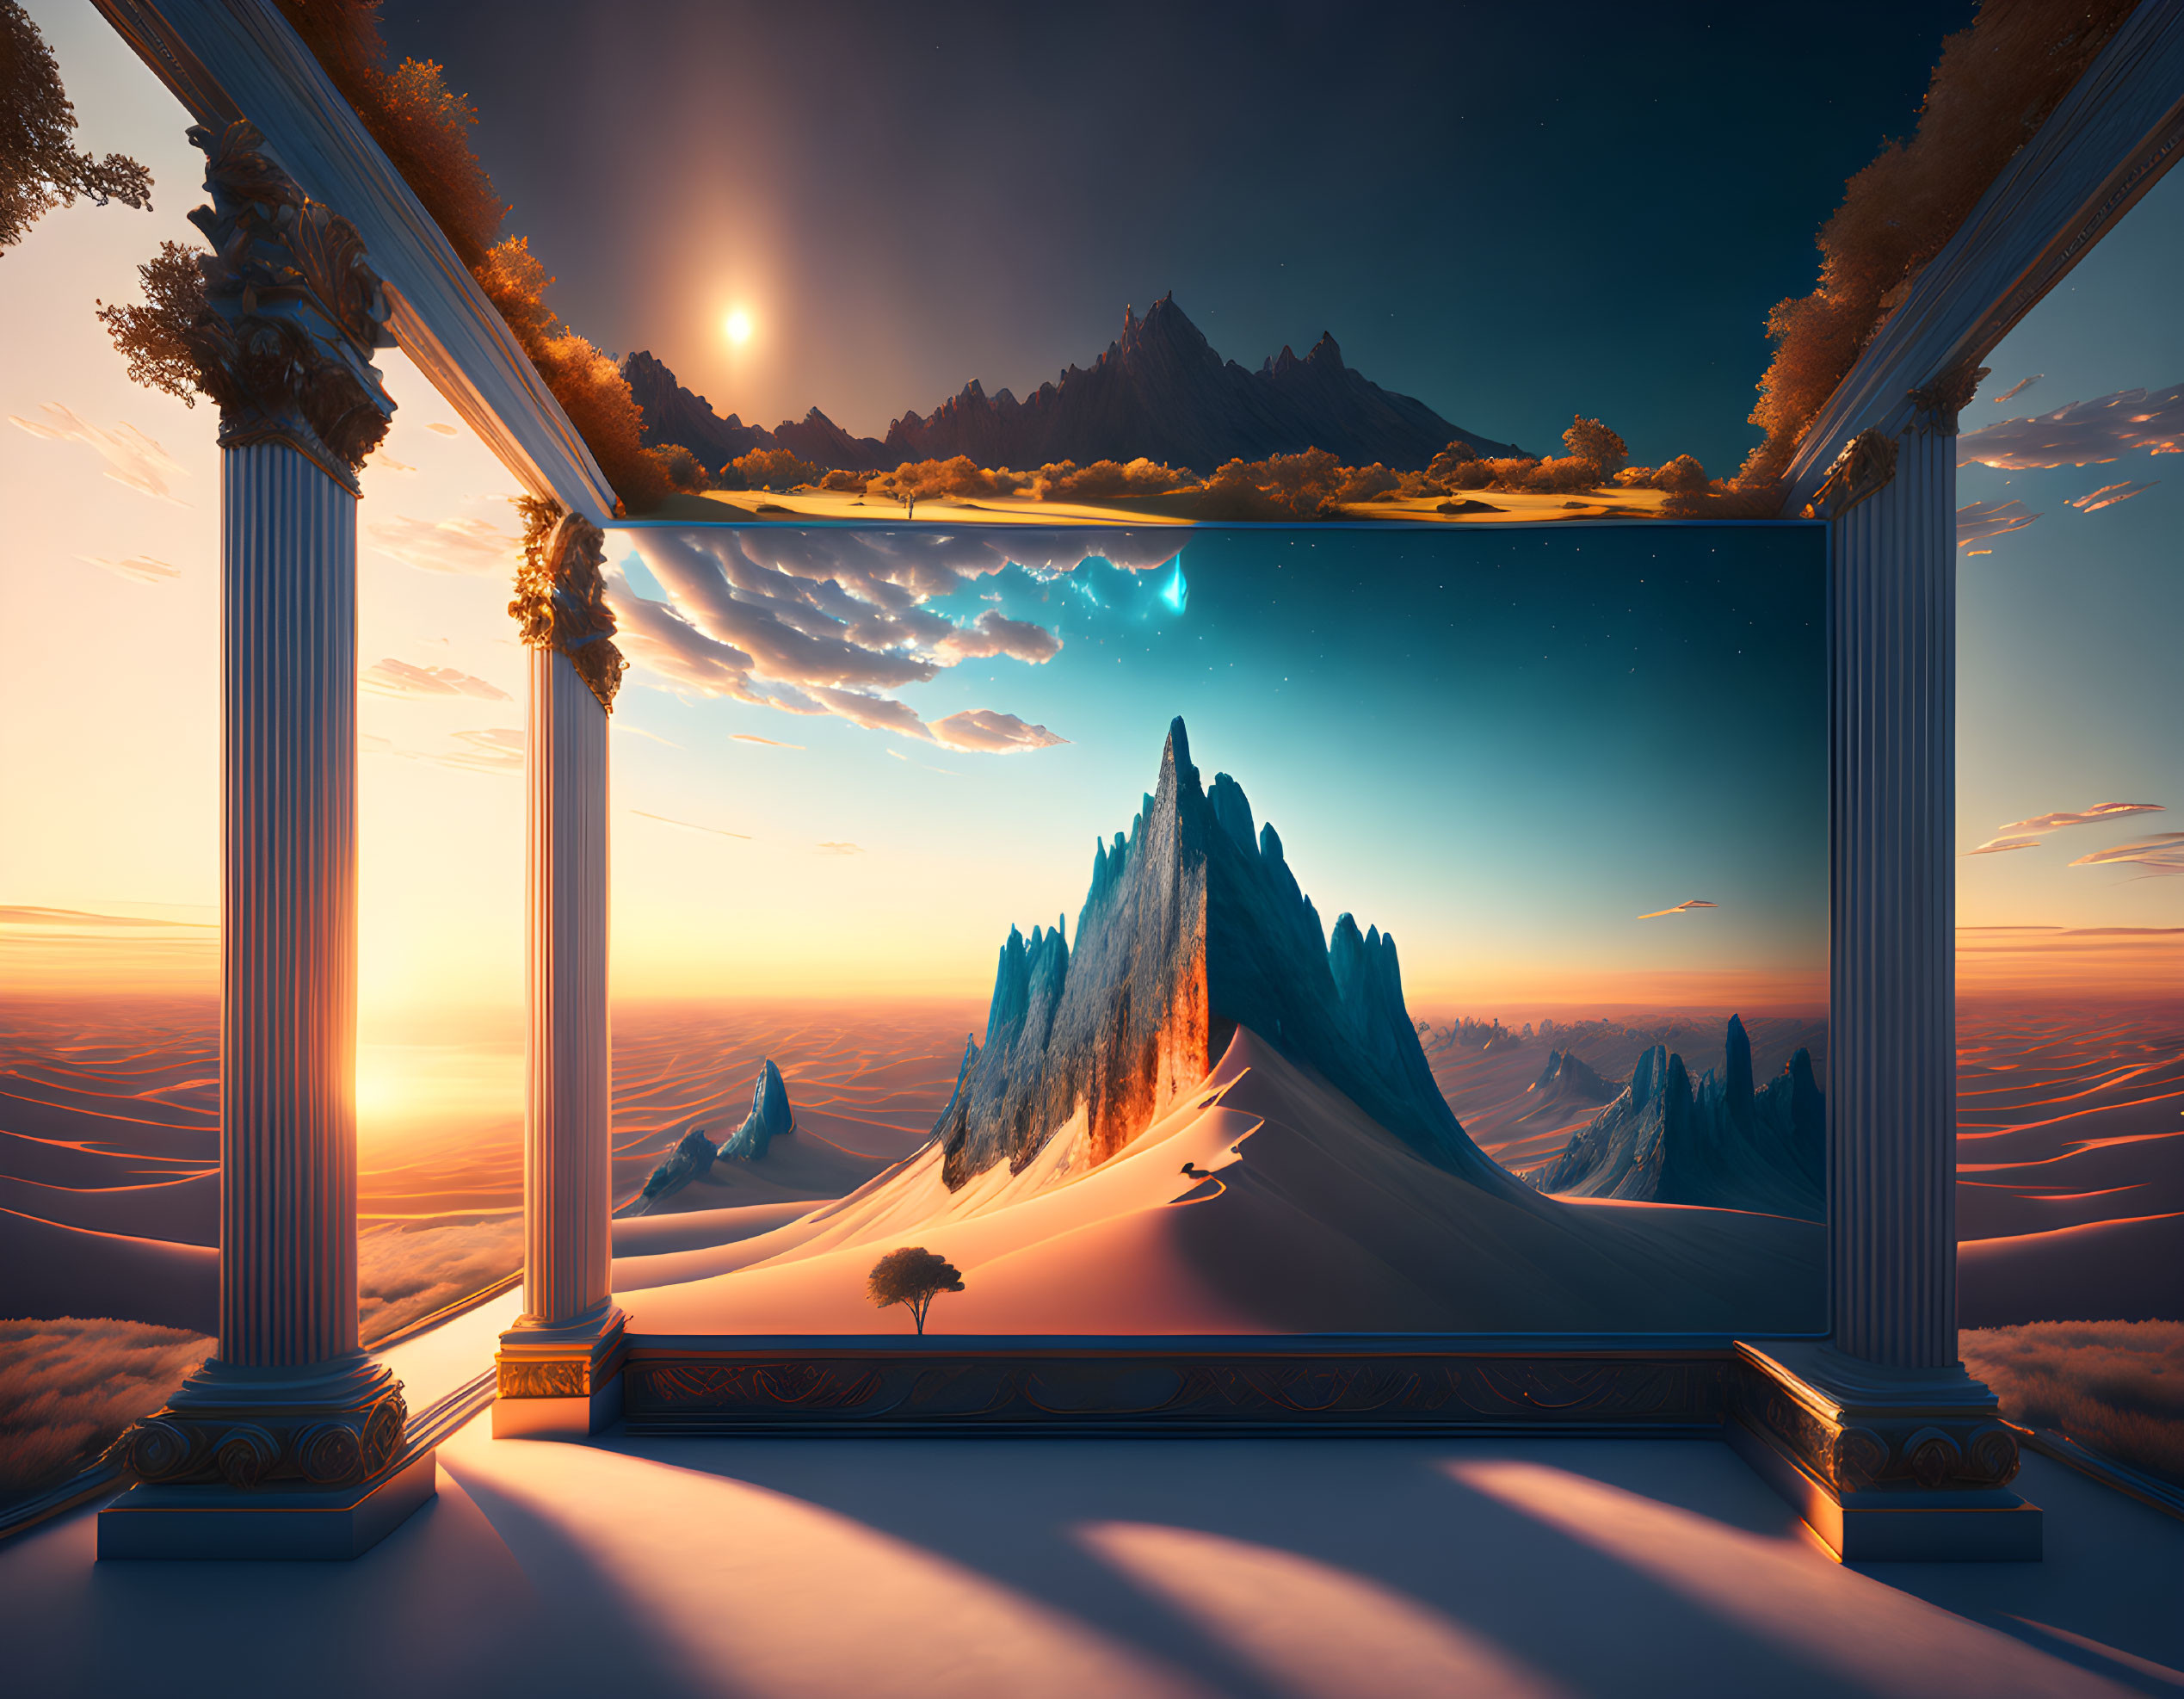 Surreal landscape with classical columns, mountains, starry sky, and dunes at sunset or